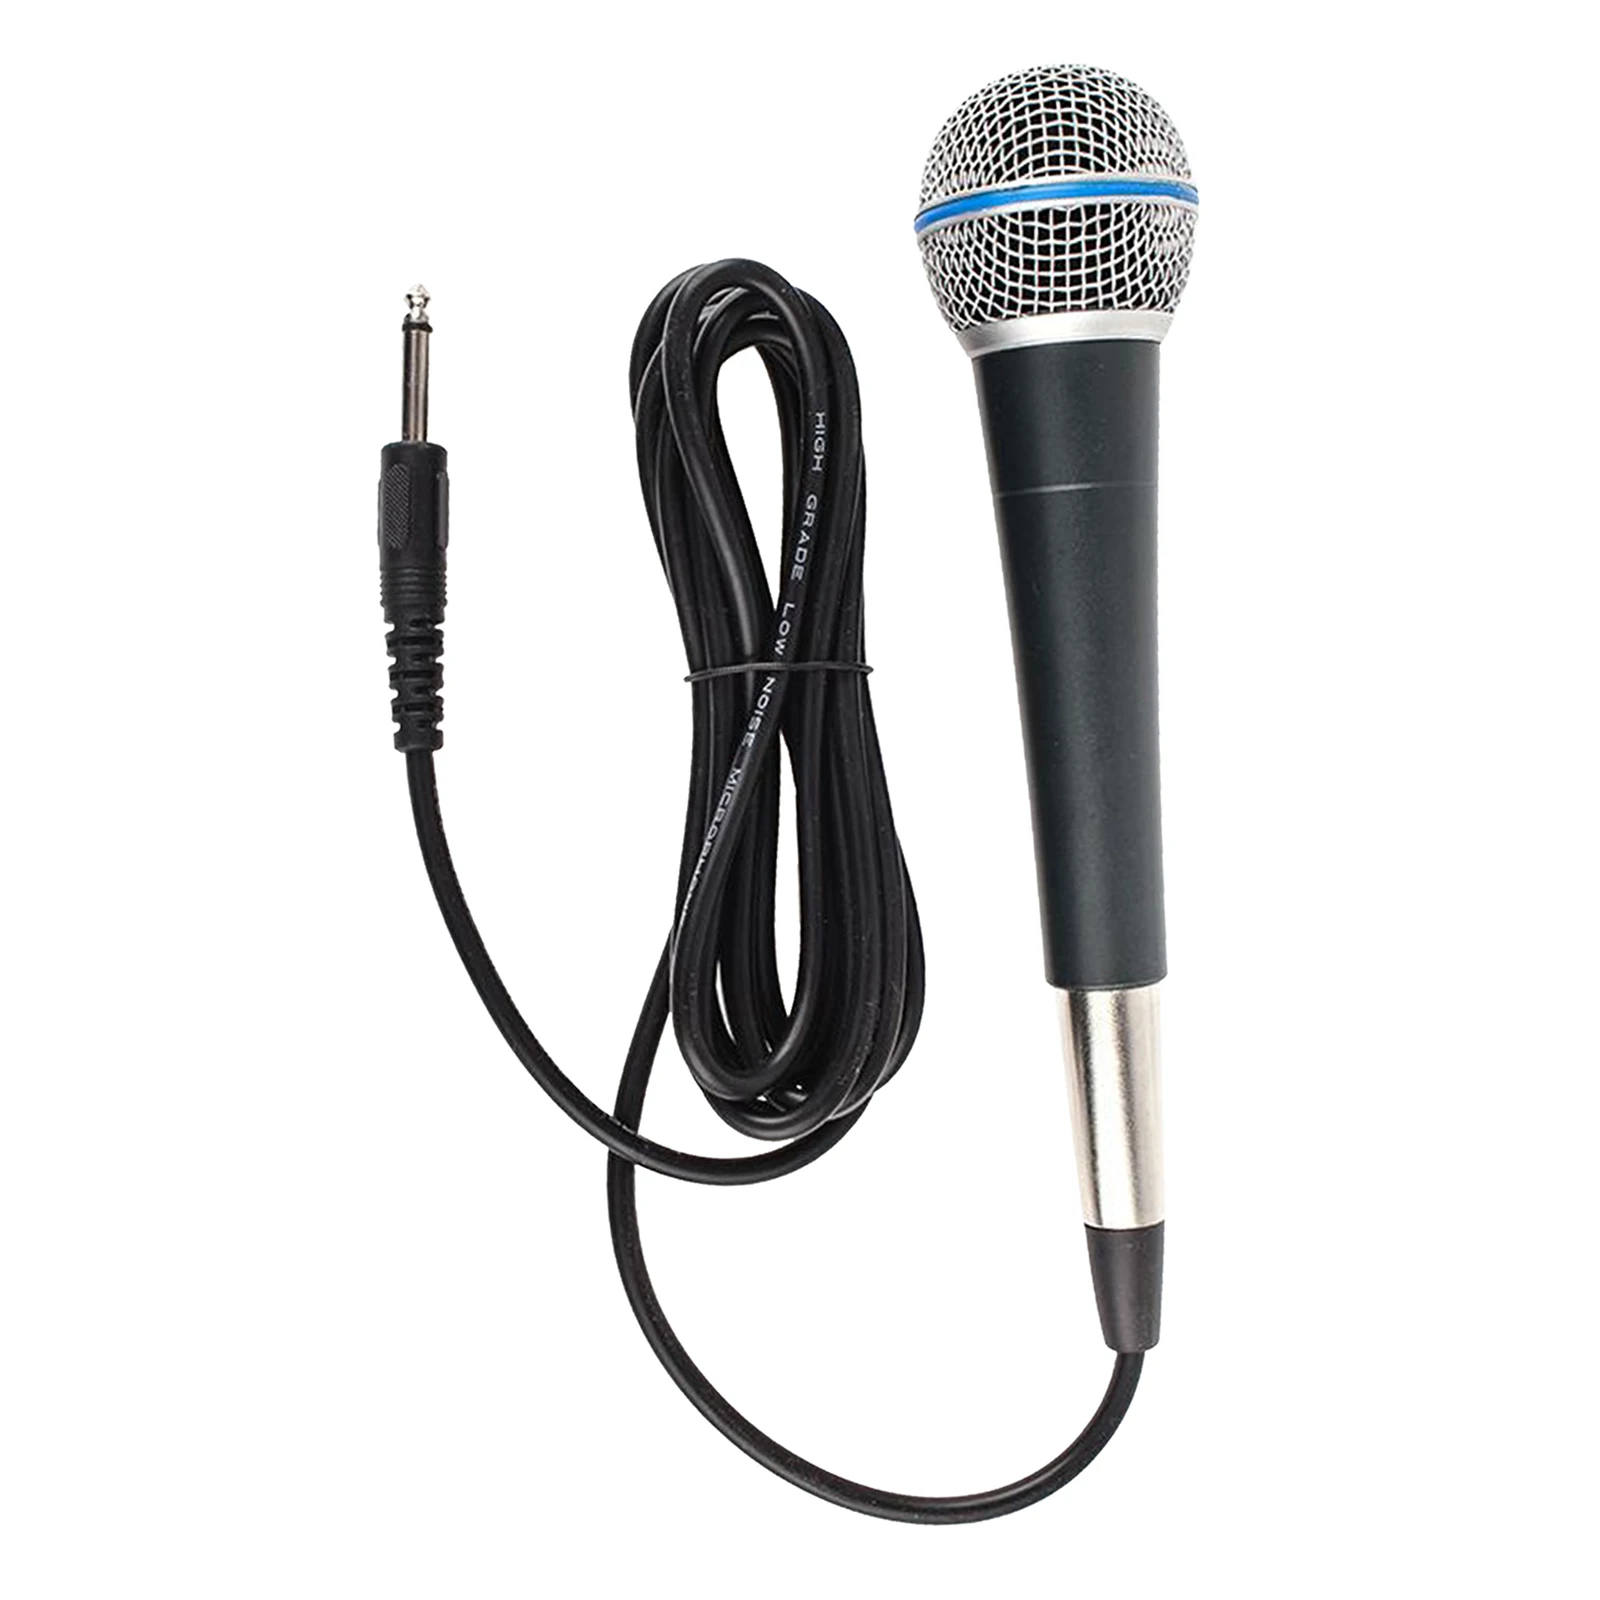 

Professional Entertainer Dynamic Karaoke Microphone KTV Sound Singing Wedding Speech Home Party Hand Held Vocal Cardioid Mic